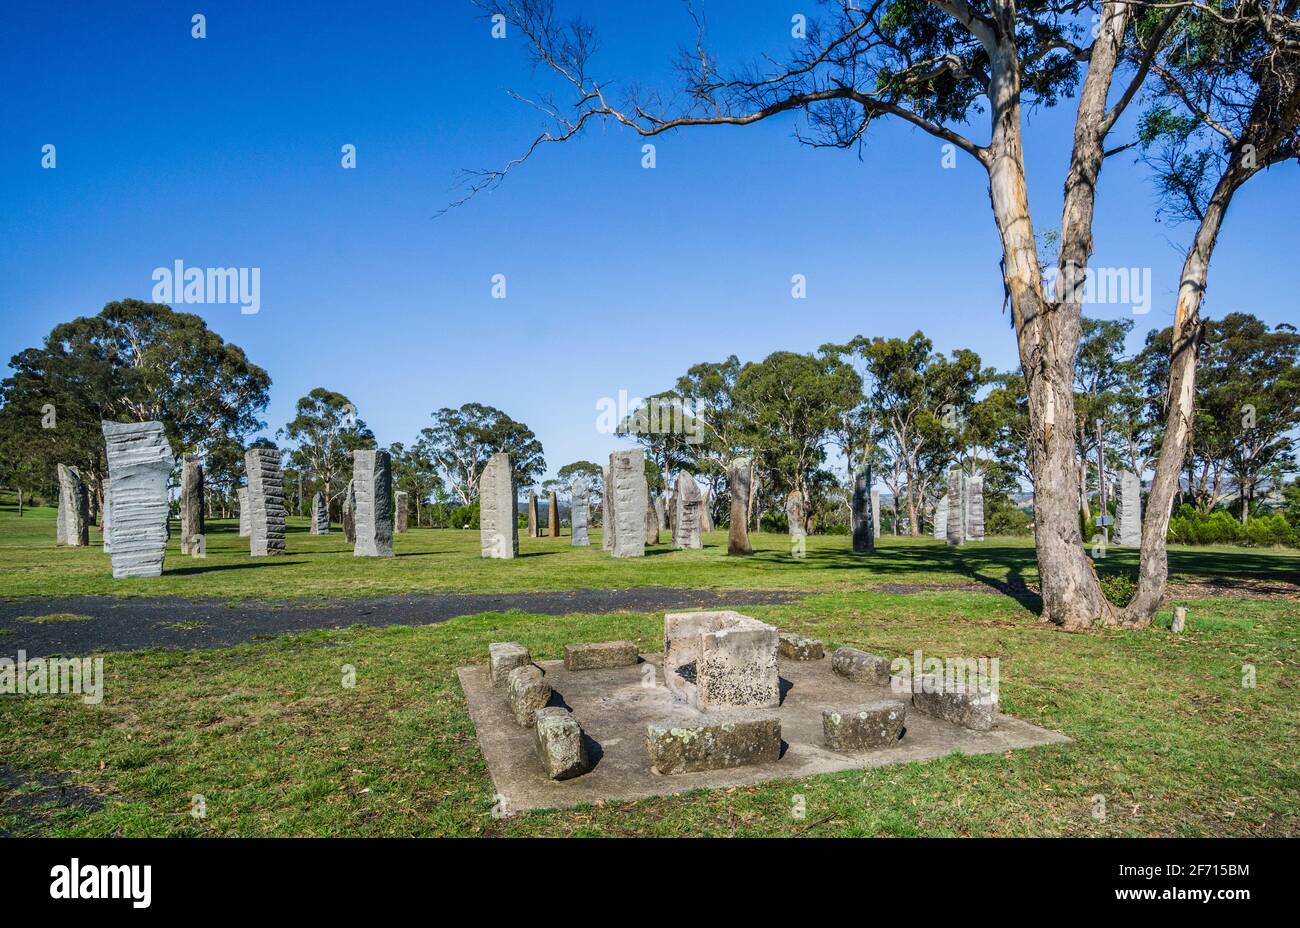 The Australian Standing Stones, errected in 1992 in Glen Innes, the monoliths pays tribute to the Celtic heritage of the early European settlers to th Stock Photo